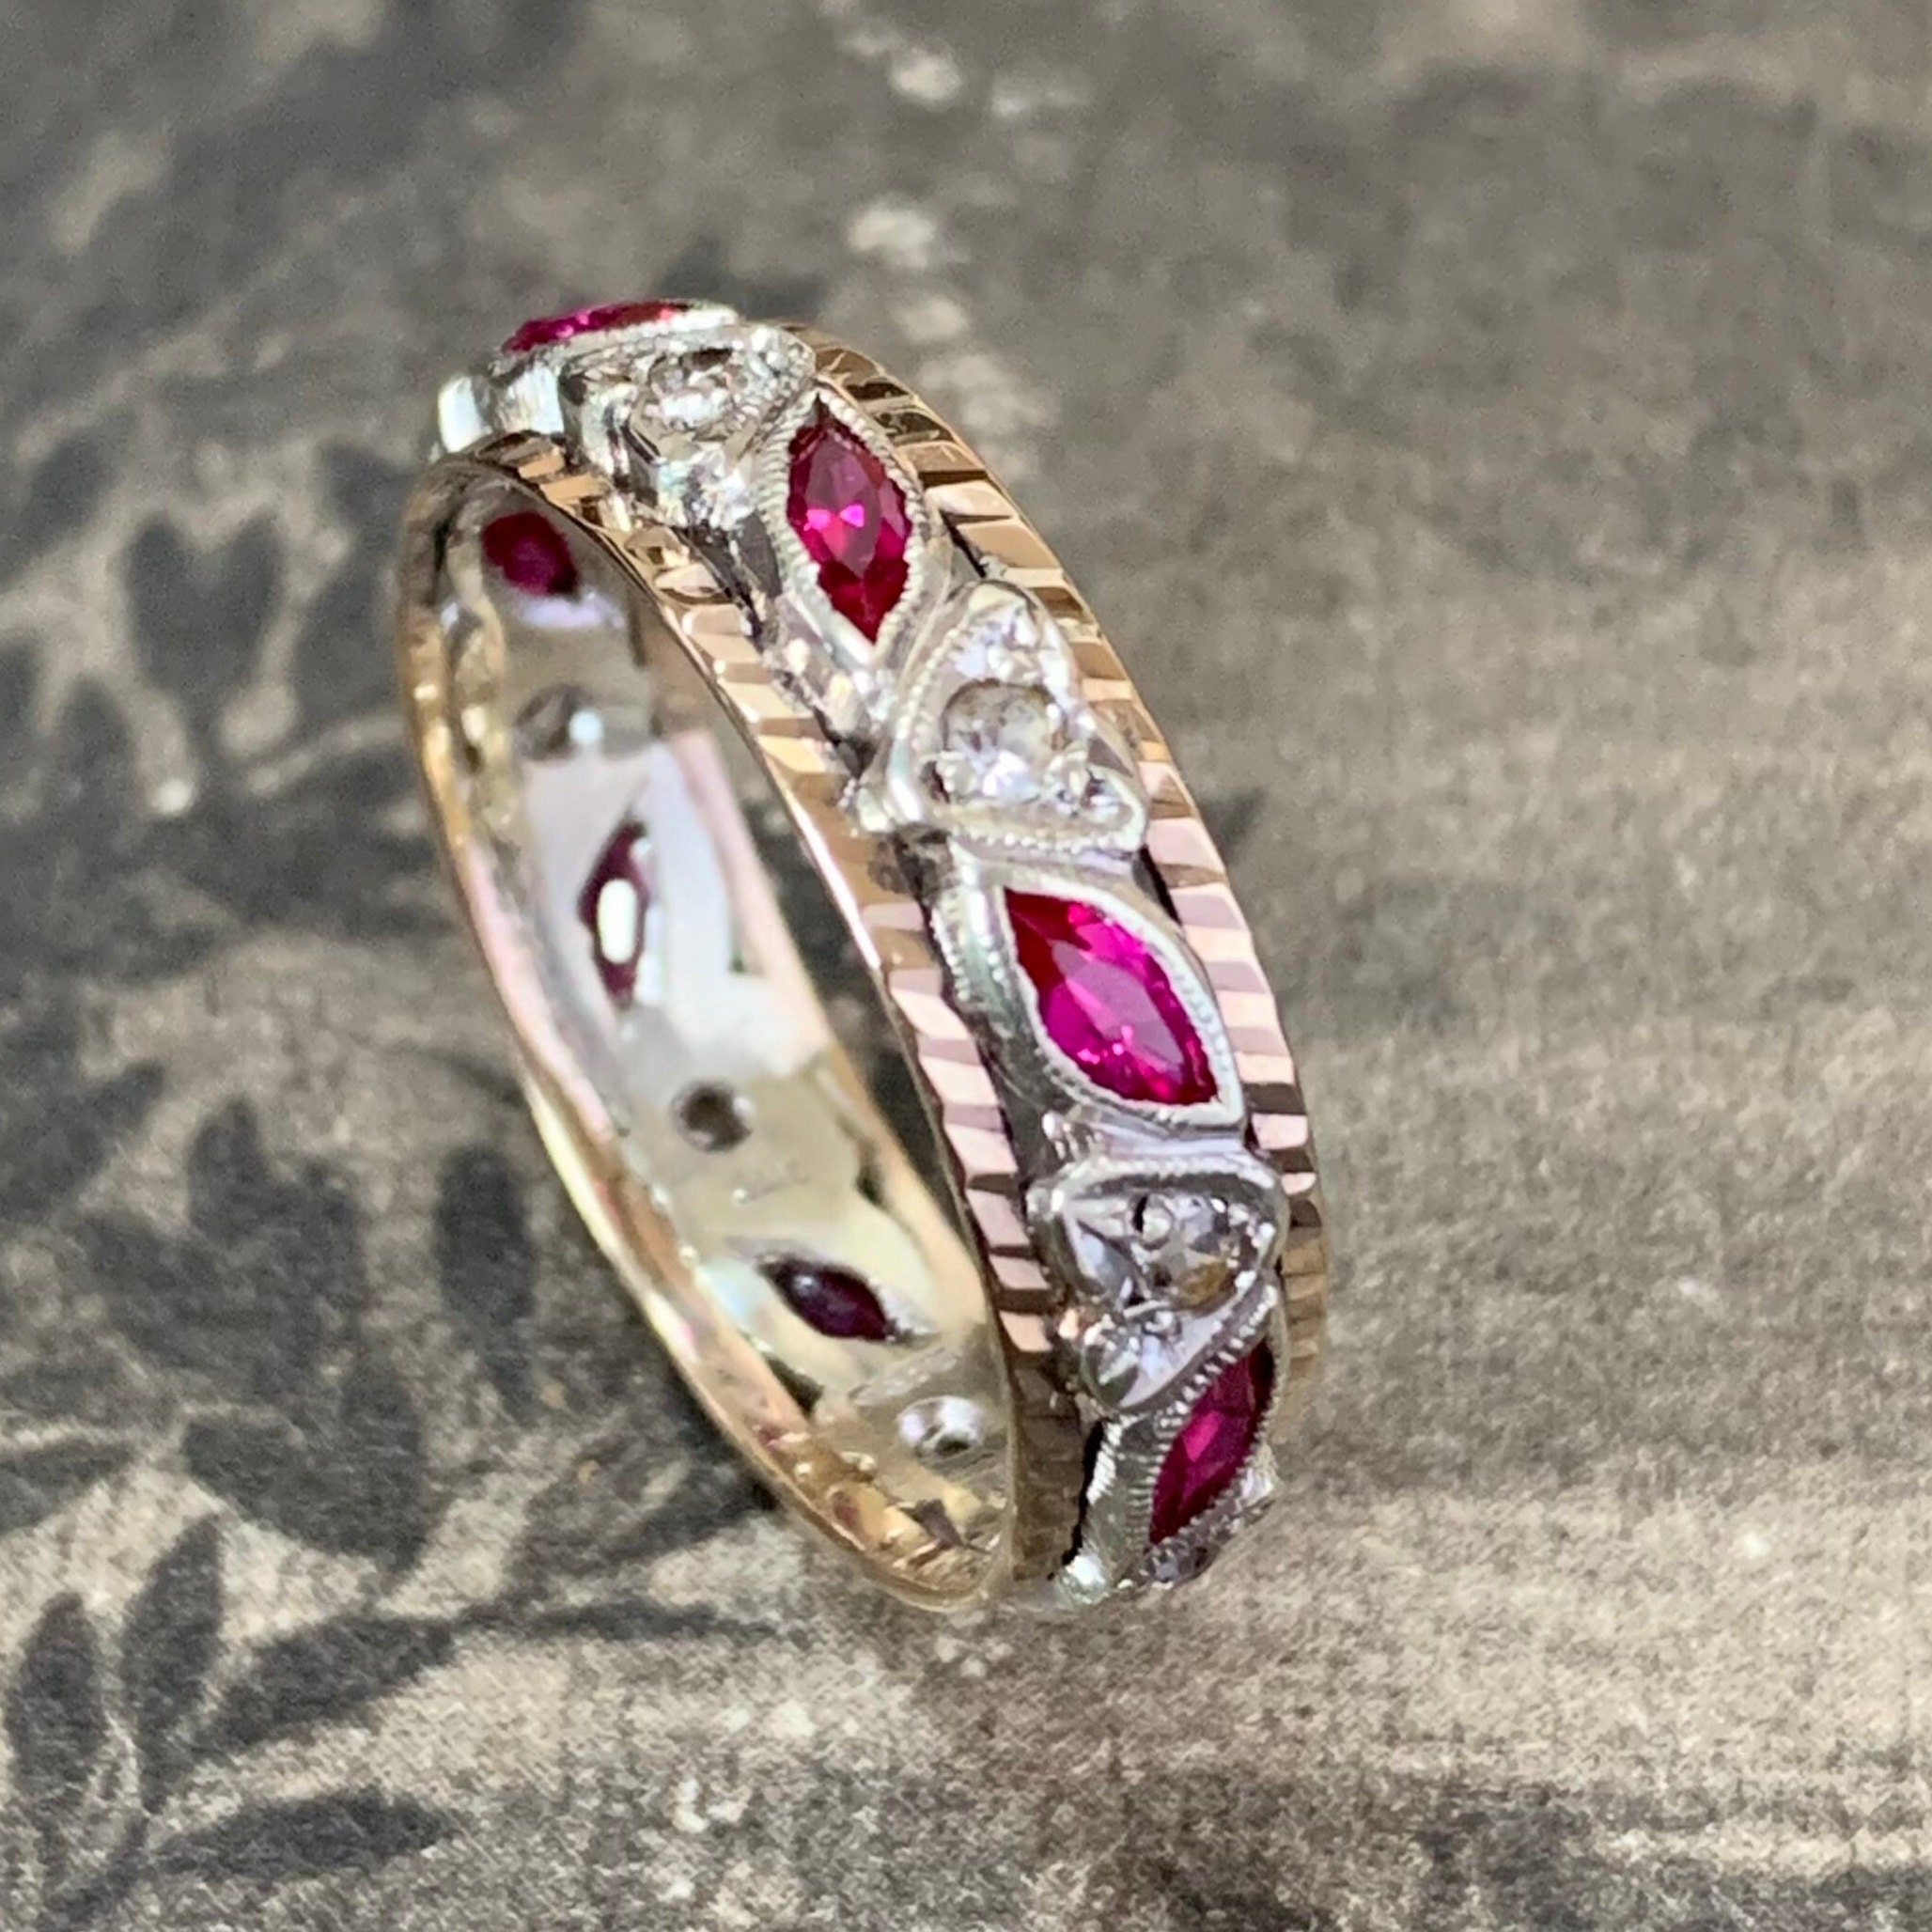 Ruby & Sapphire Eternity Ring. Retro Engagement Or Wedding Ring Made in England 1976. A Beautiful Piece